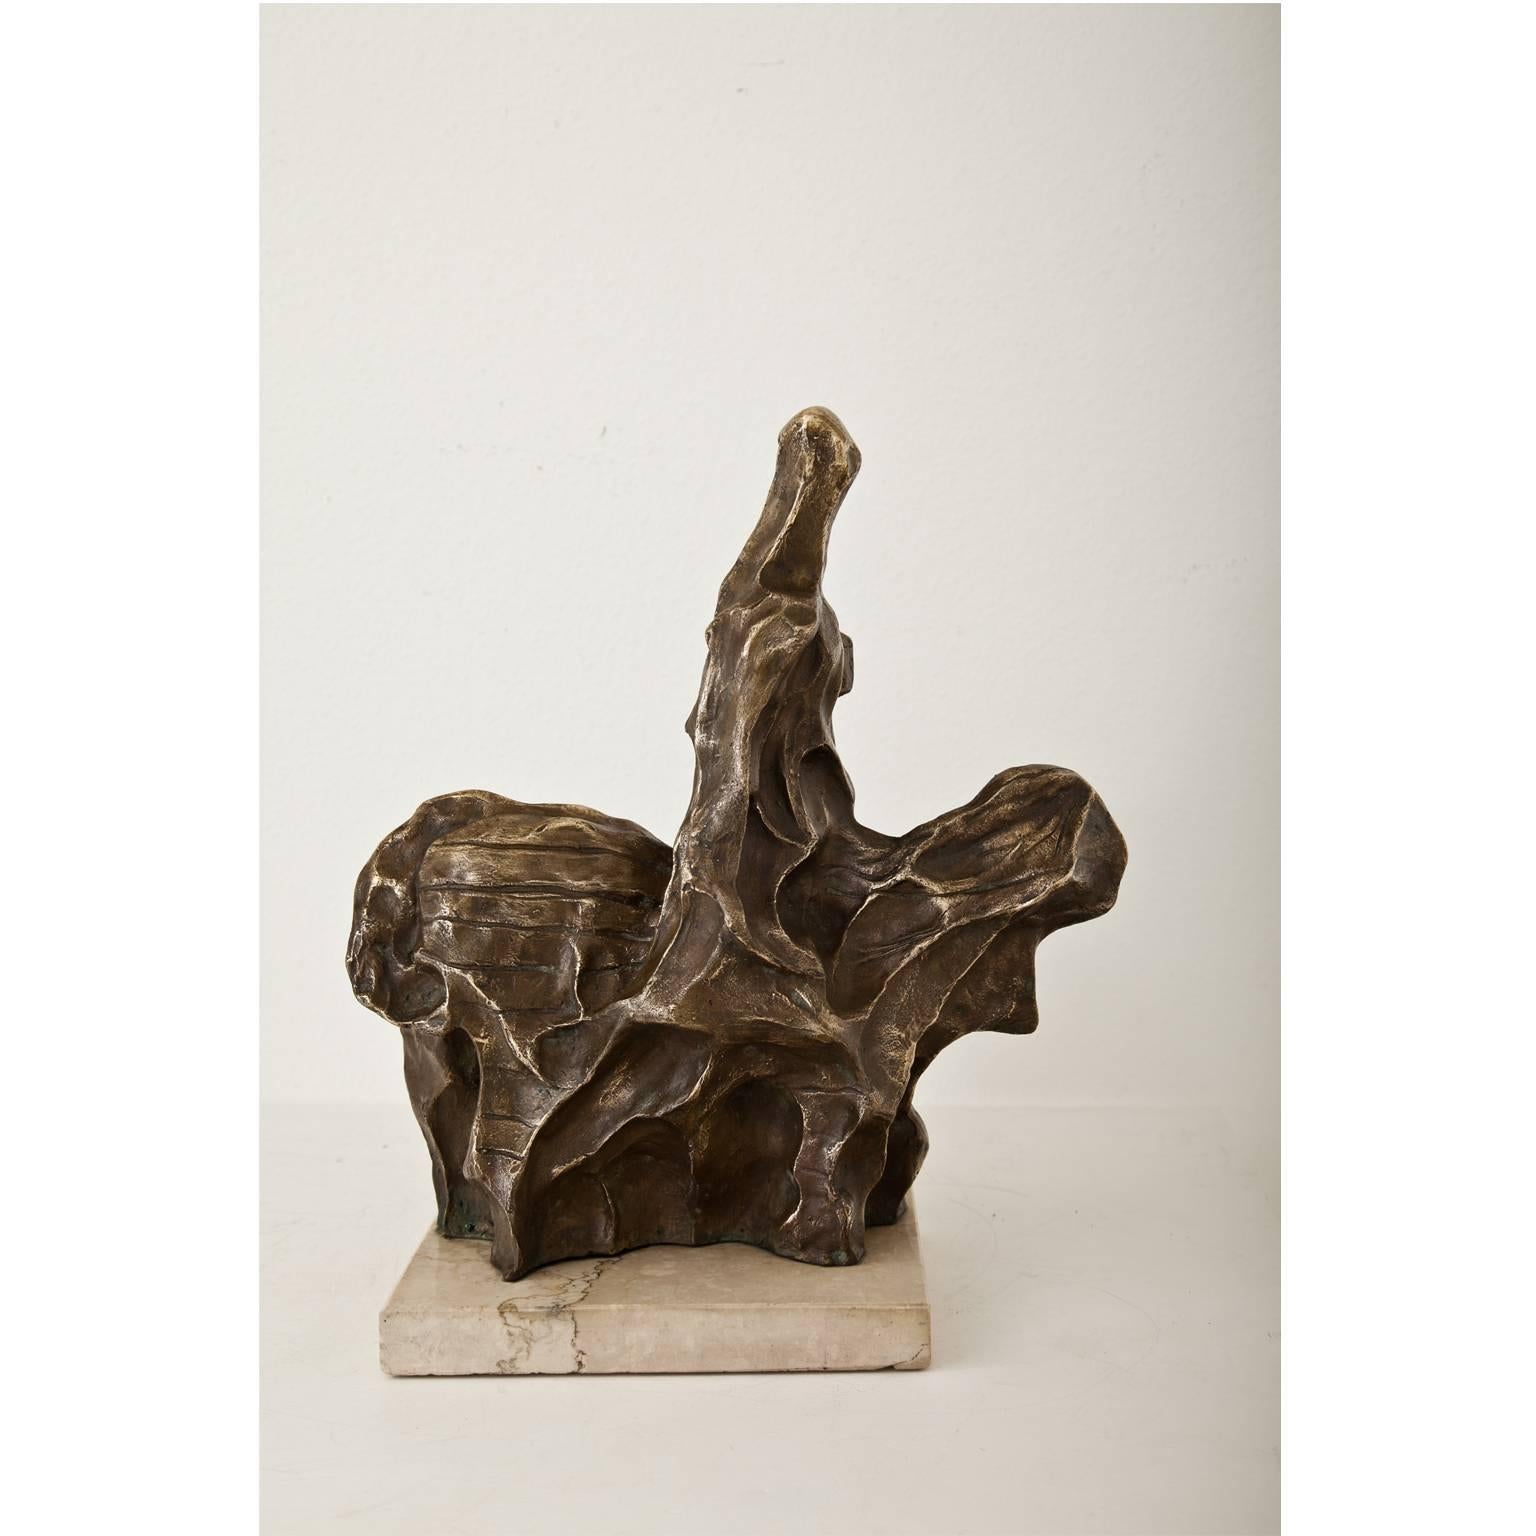 Small bronze sculpture of a rider on his horse in an abstract and soft design. The surface of the rider is structured with concave indentations; the horse is marked with horizontal lines. The sculpture stands on a rectangular marble plinth and the